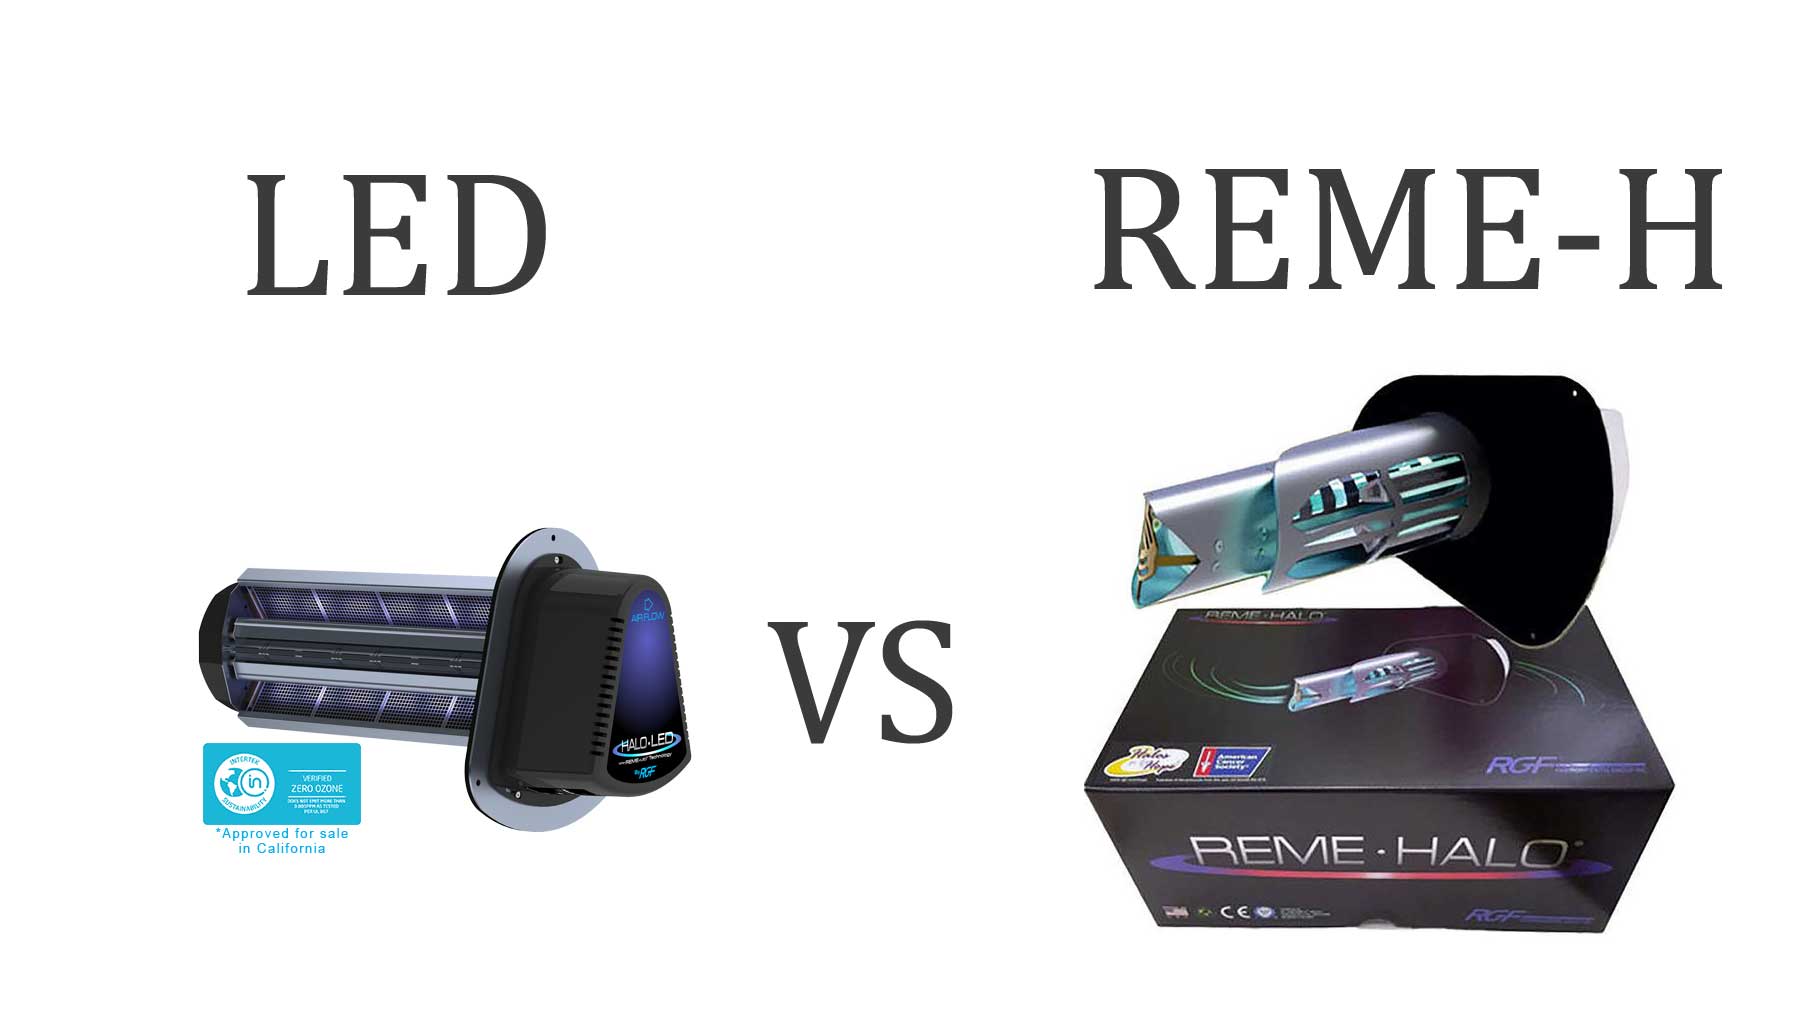 REME HALO Vs LED Induct Air Purifiers - Atomic Filters